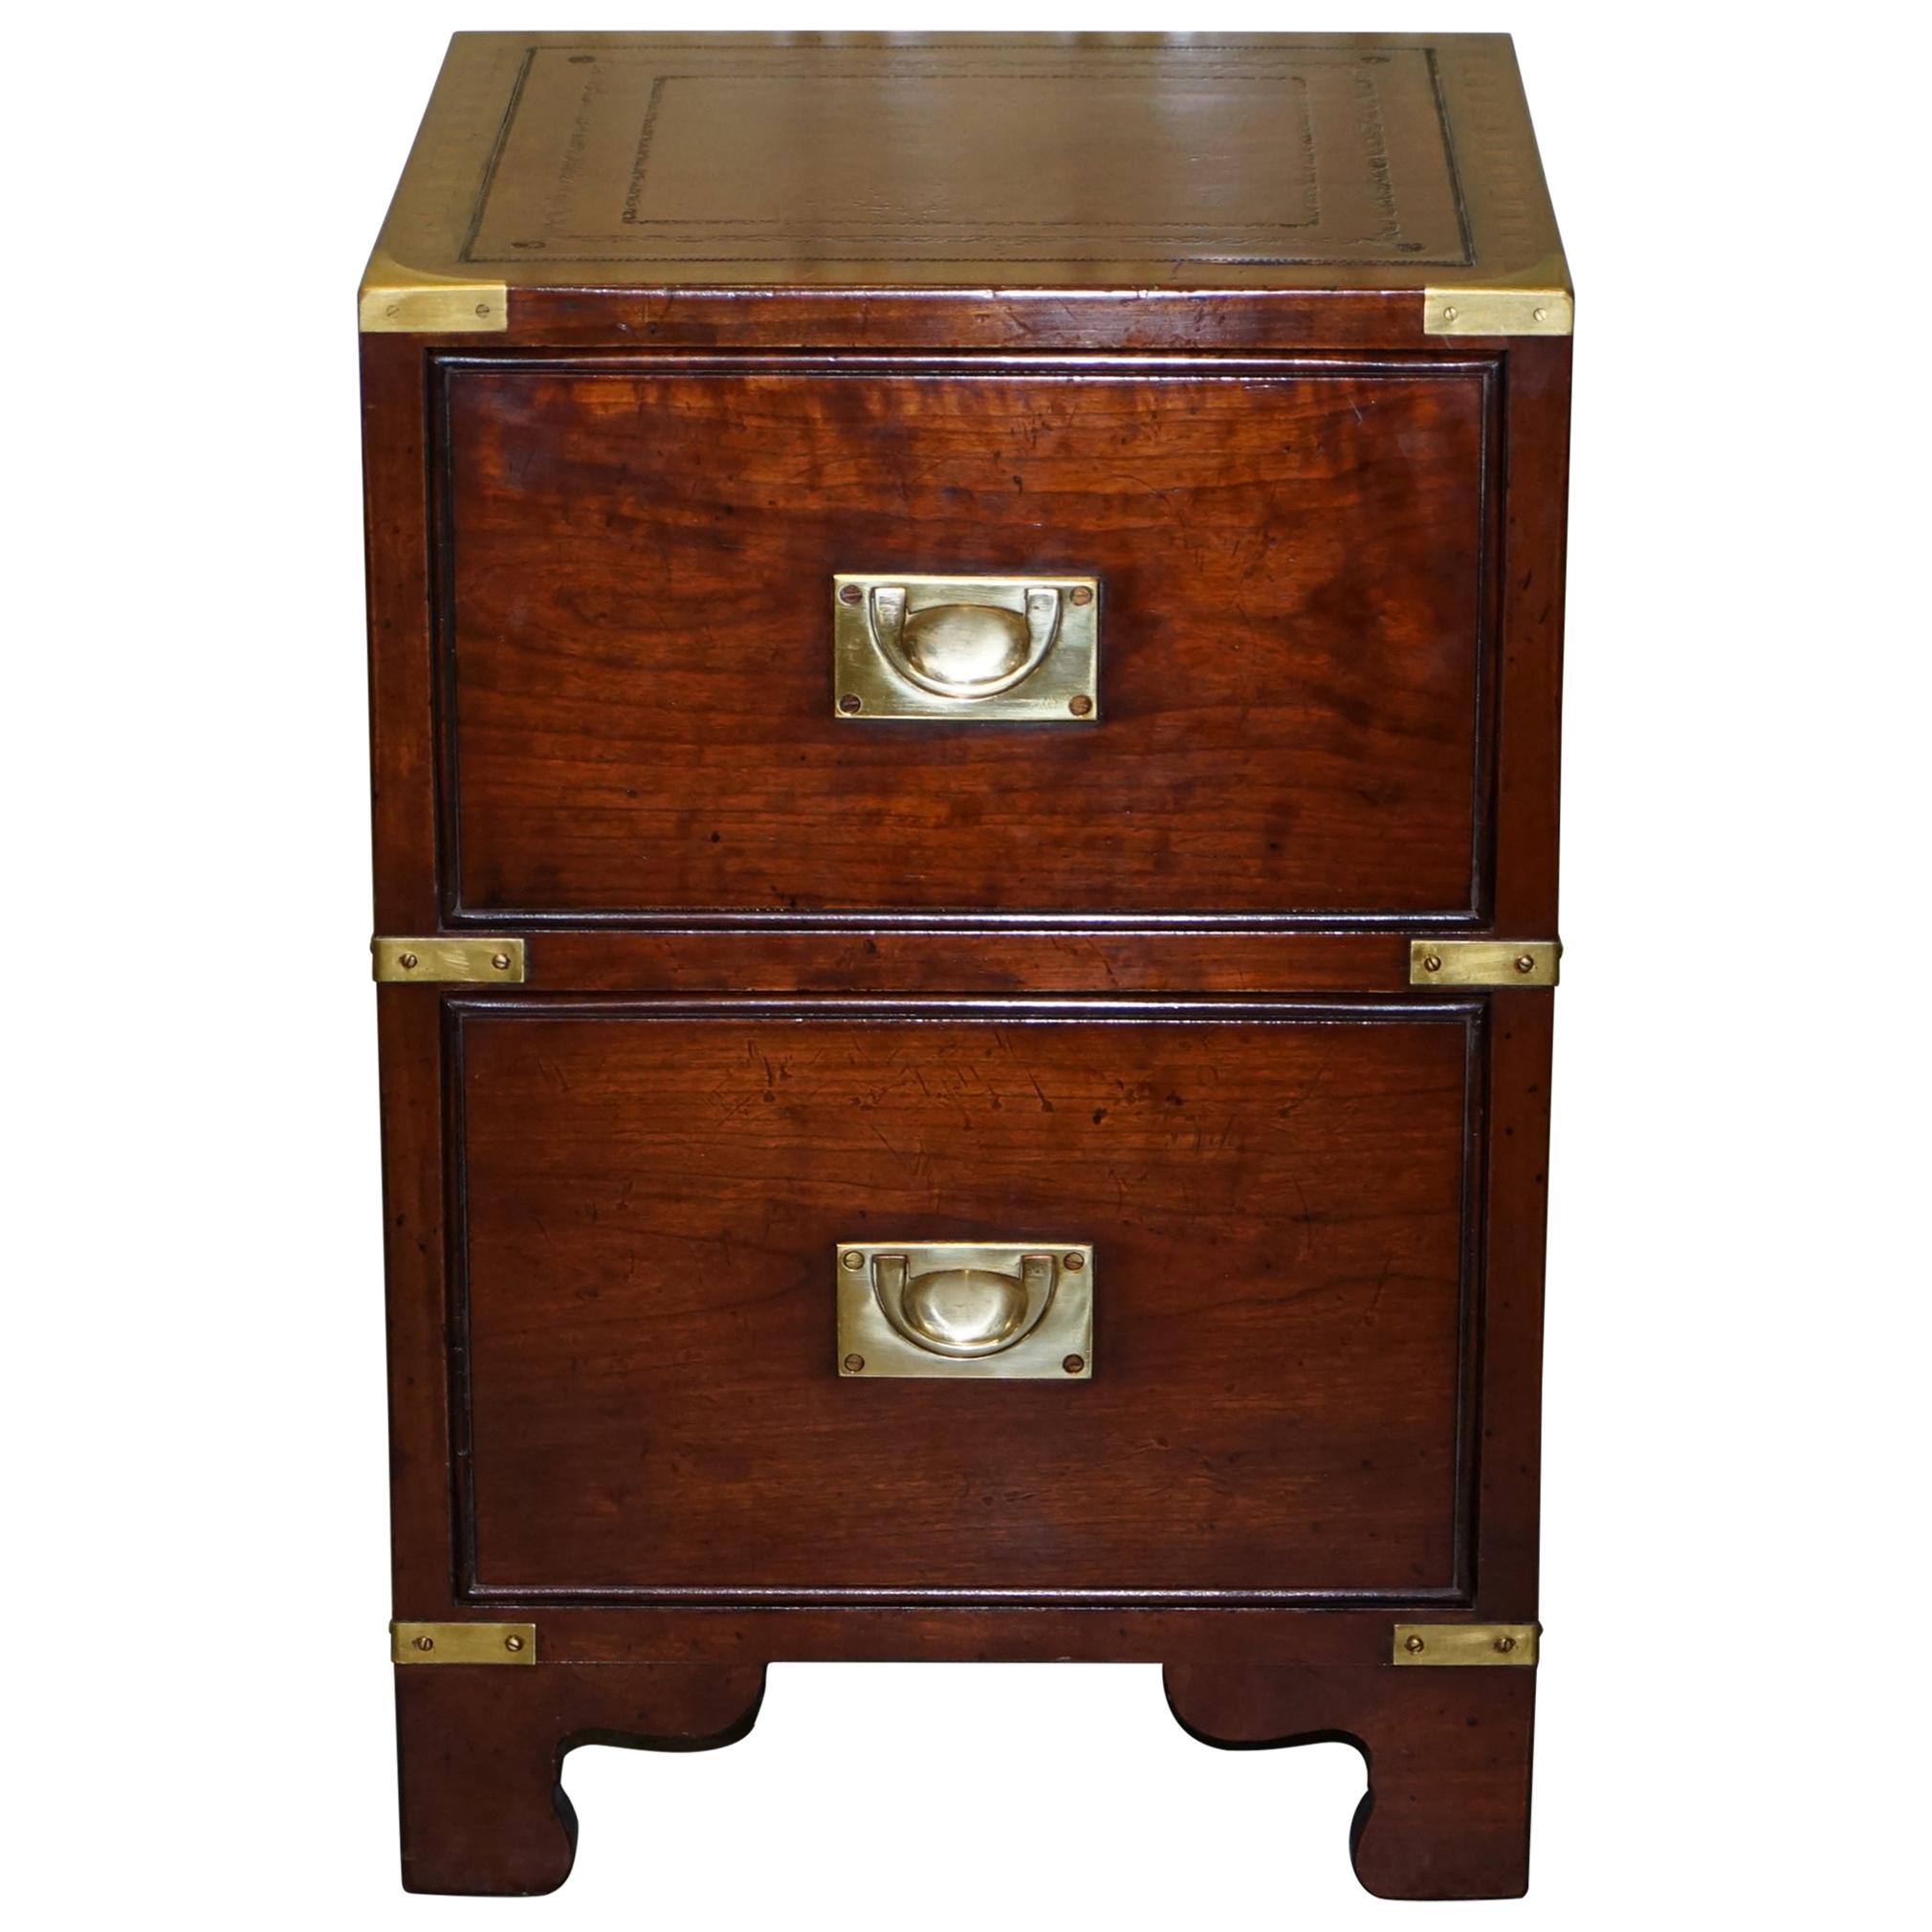 Harrods London Reh Kennedy Military Campaign Bedside Table Size Chest of Drawers